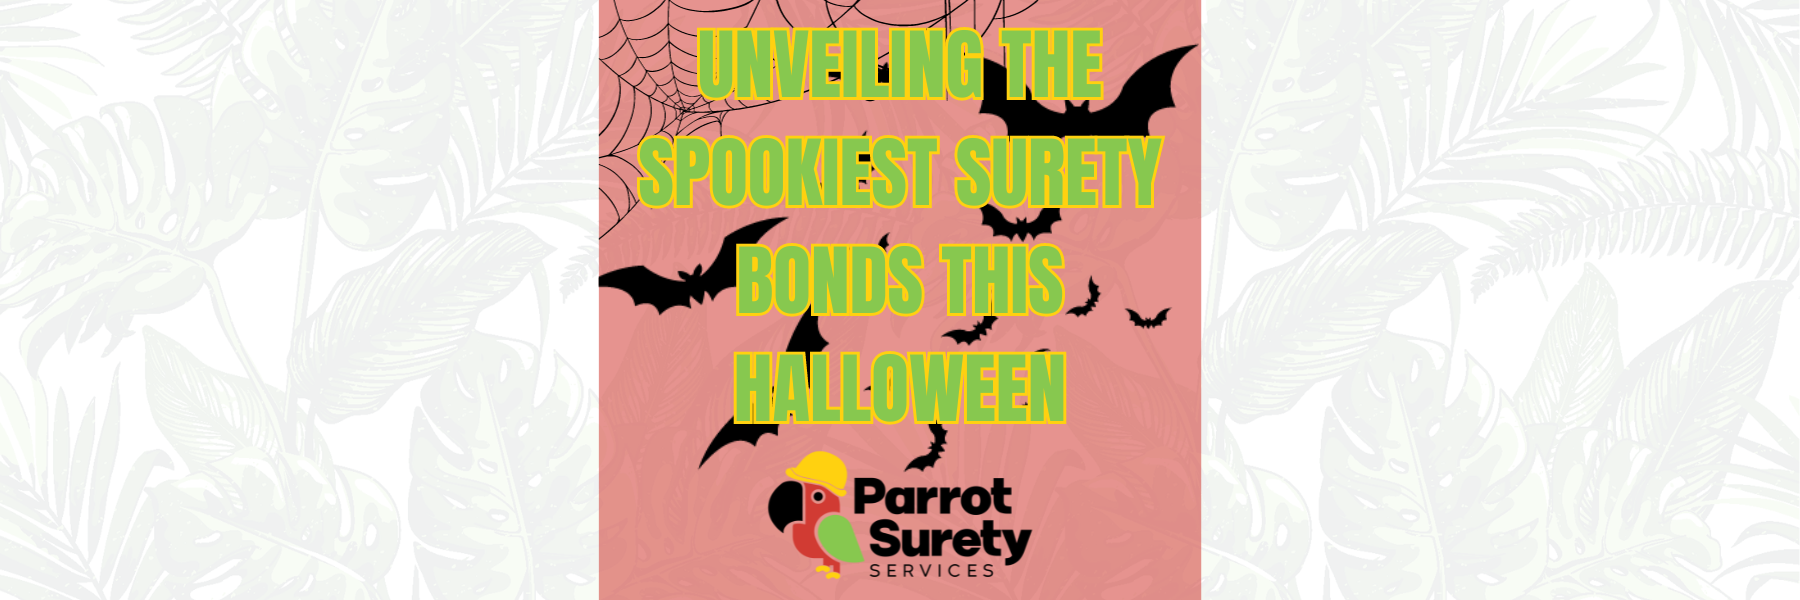 Unveiling the Spookiest Surety Bonds This Halloween title image parrot surety services